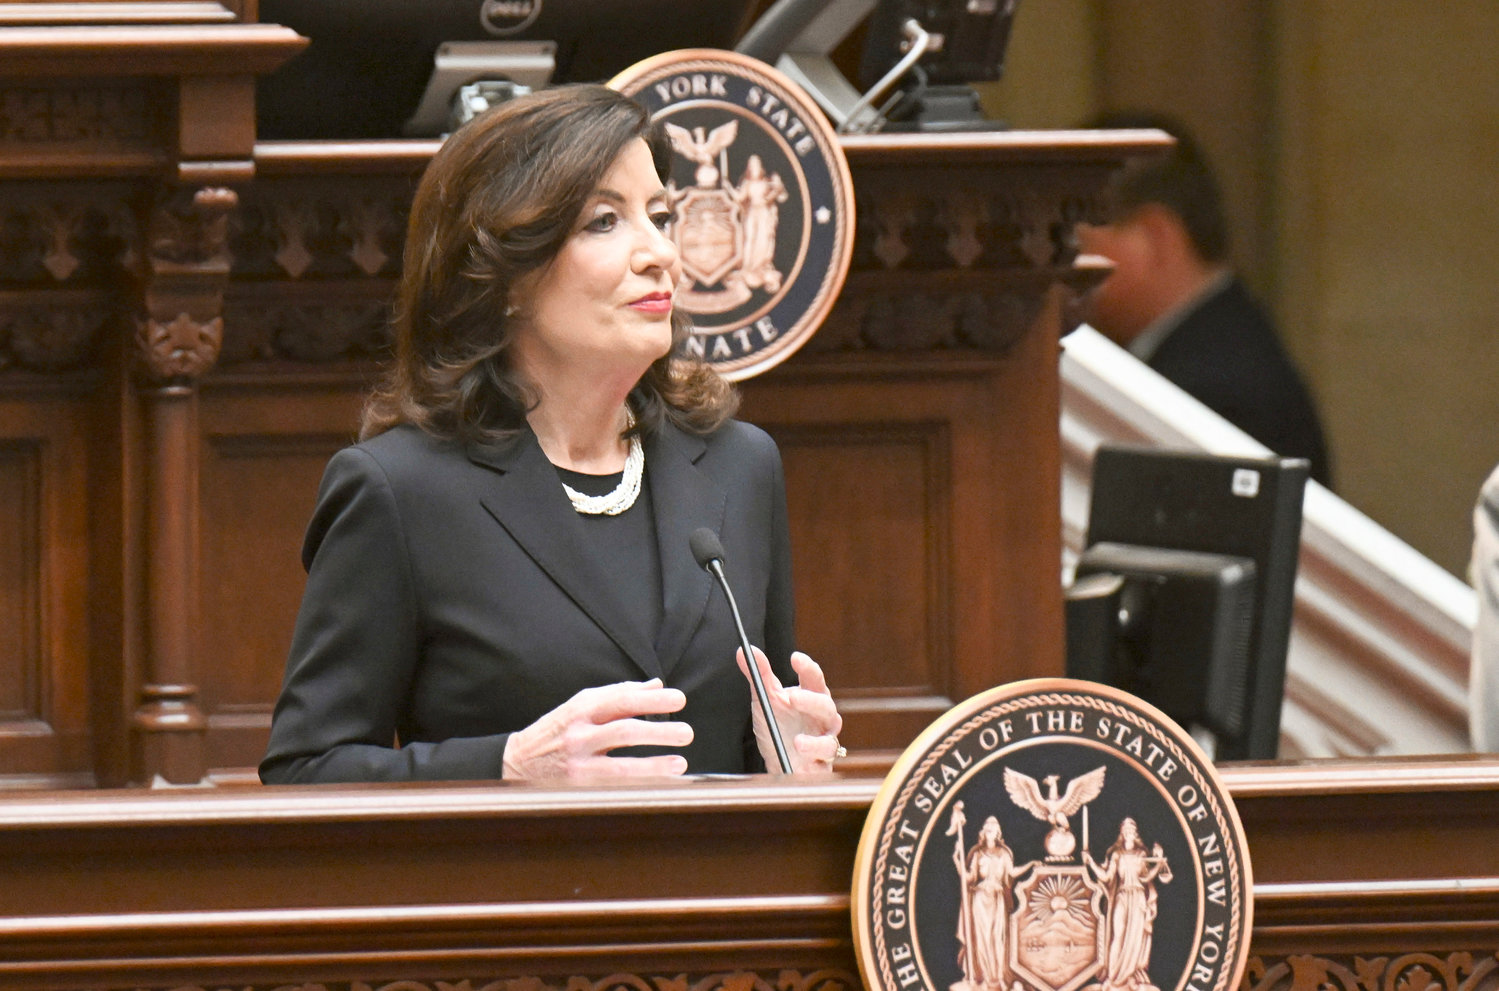 New York Gov. Kathy Hochul delivers her State of the State address in the Assembly Chamber at the state Capitol, Tuesday, Jan. 10, 2023, in Albany, N.Y.